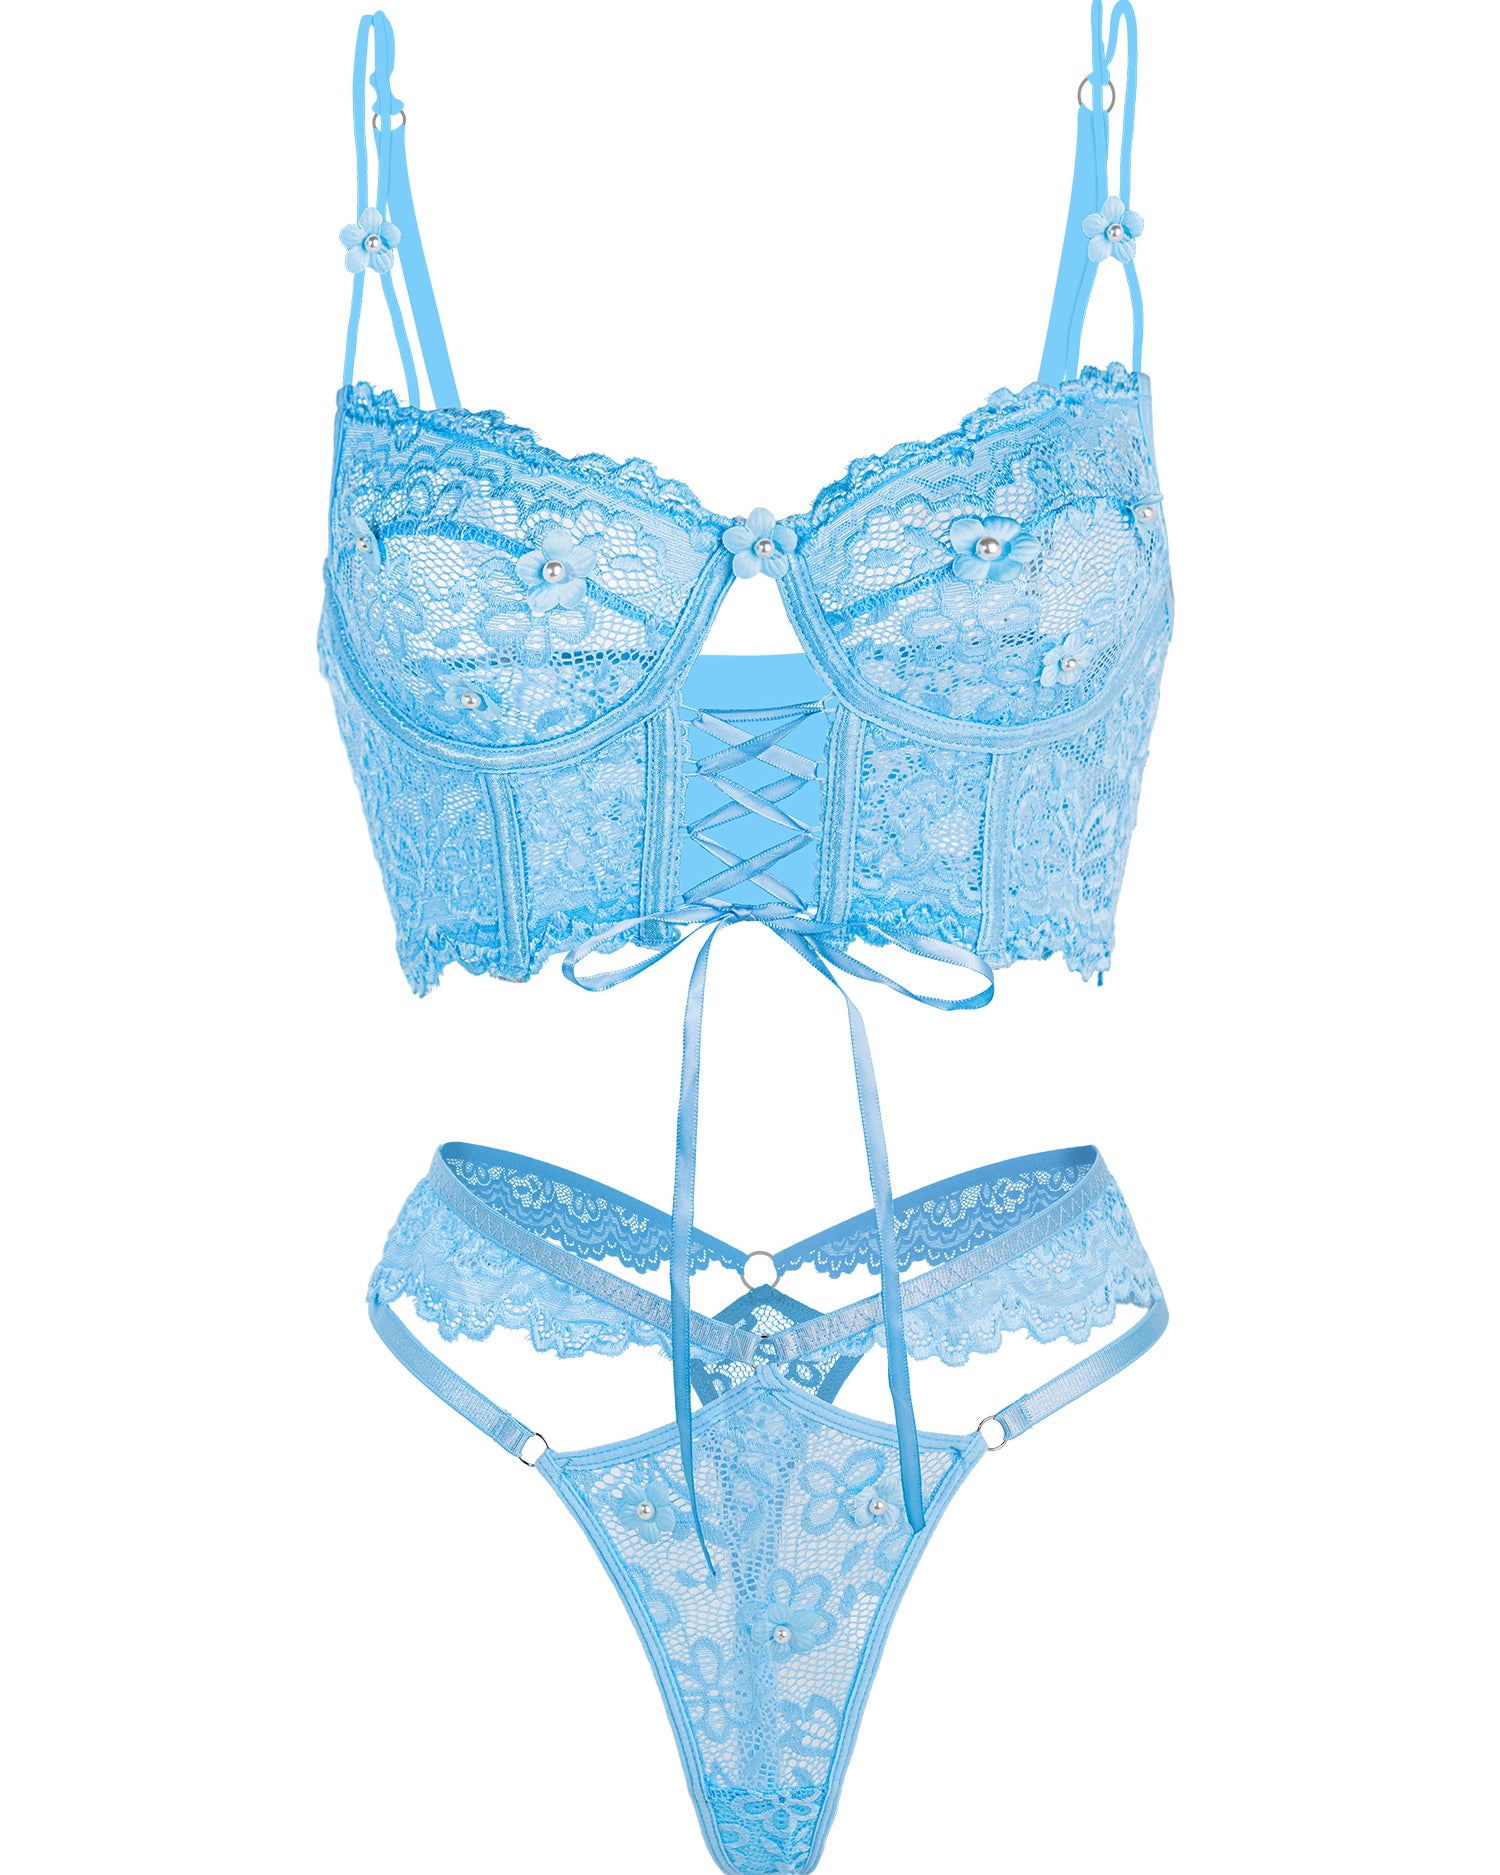 Blue Pearls Small Flower Lace Lingerie Set